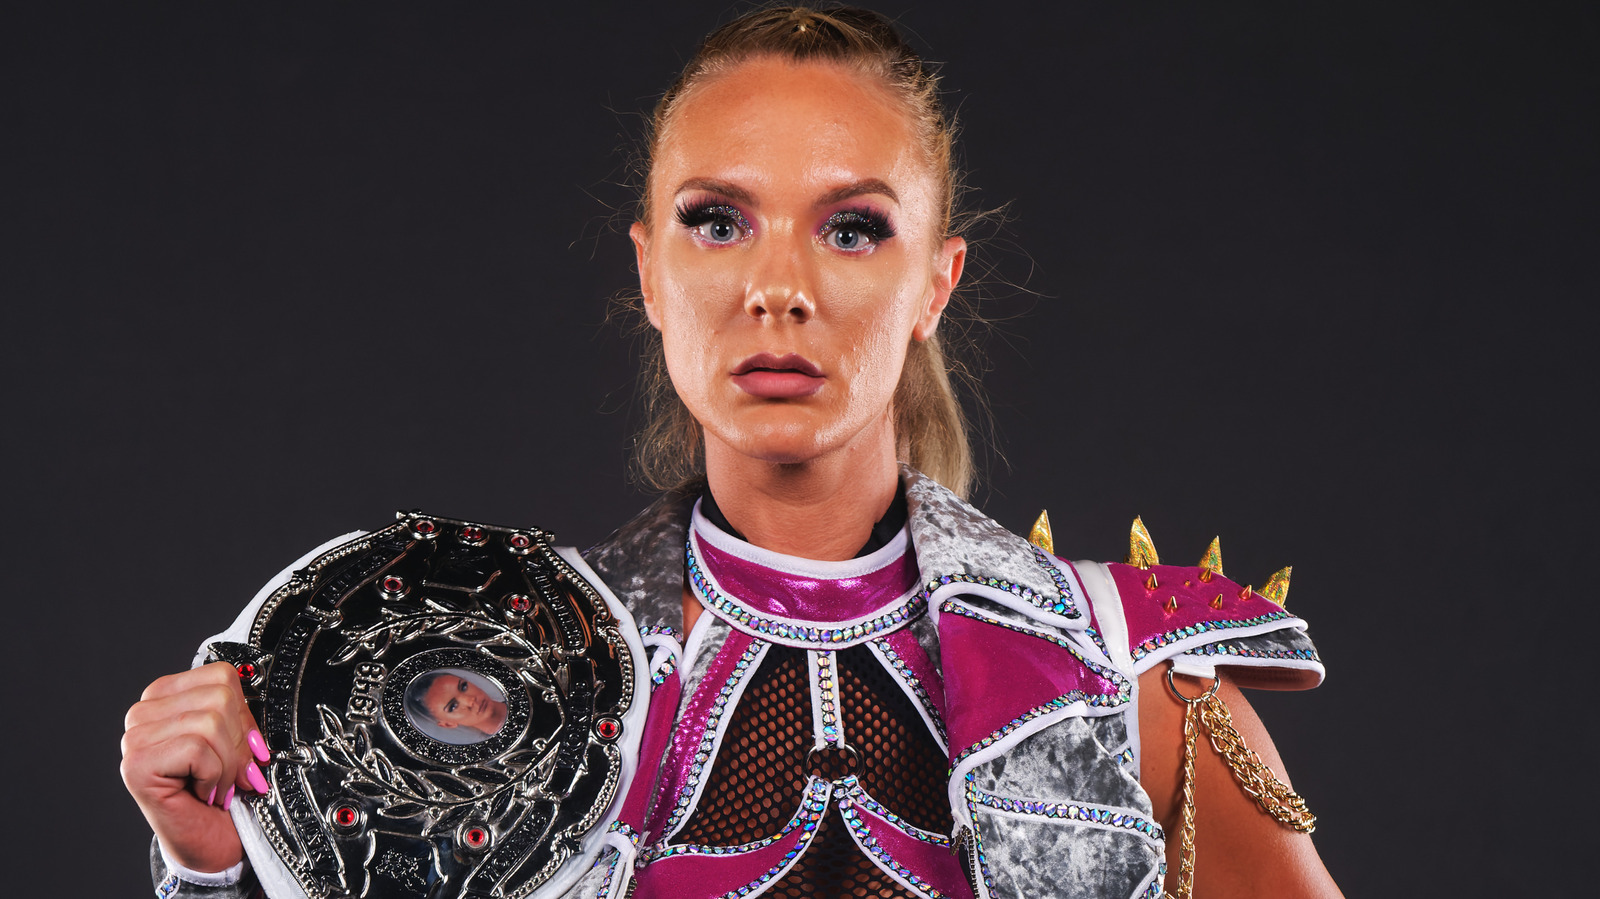 NWA's Kamille On Standing Out, Being Yourself & History Happening At NWA 75 – Exclusive